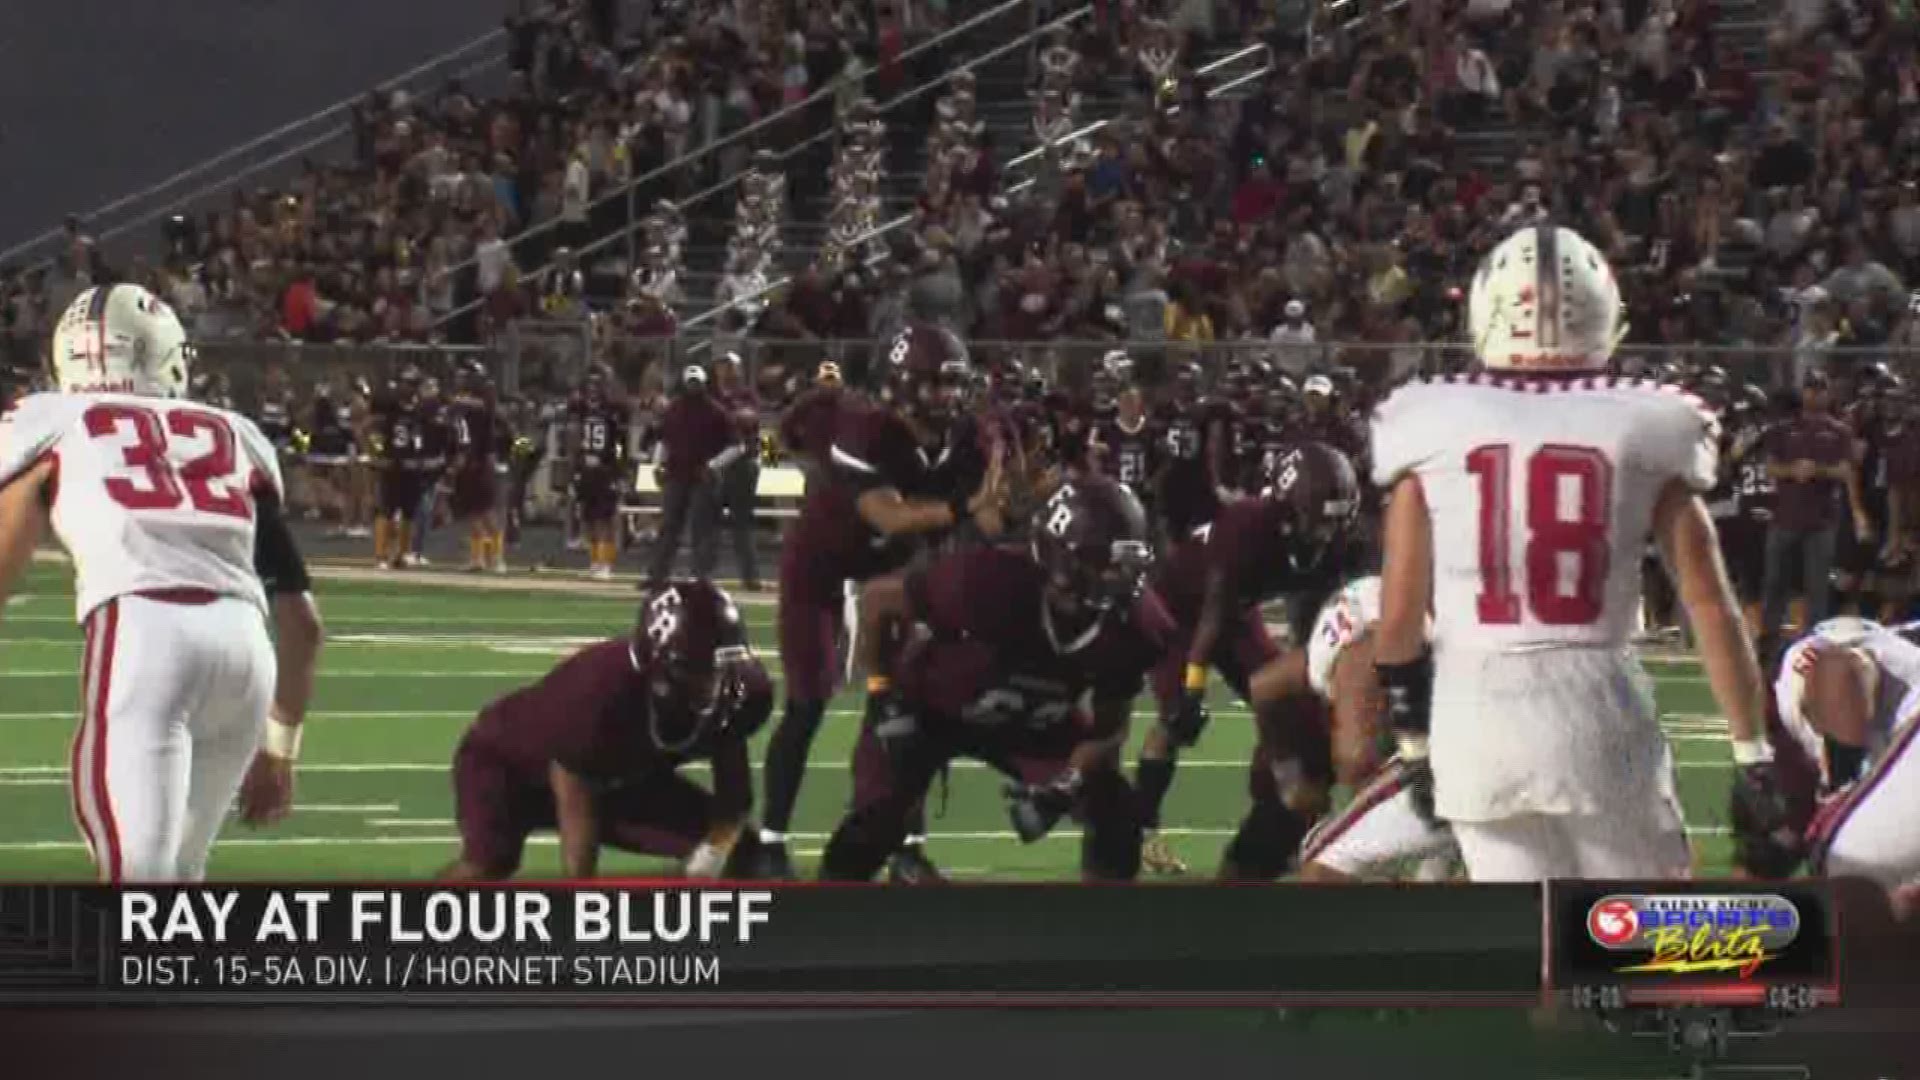 Part II includes highlights of: Miller's win over Victoria West. Flour Bluff's win over Ray. Moody's big win over King. Victoria East's win over Carroll.